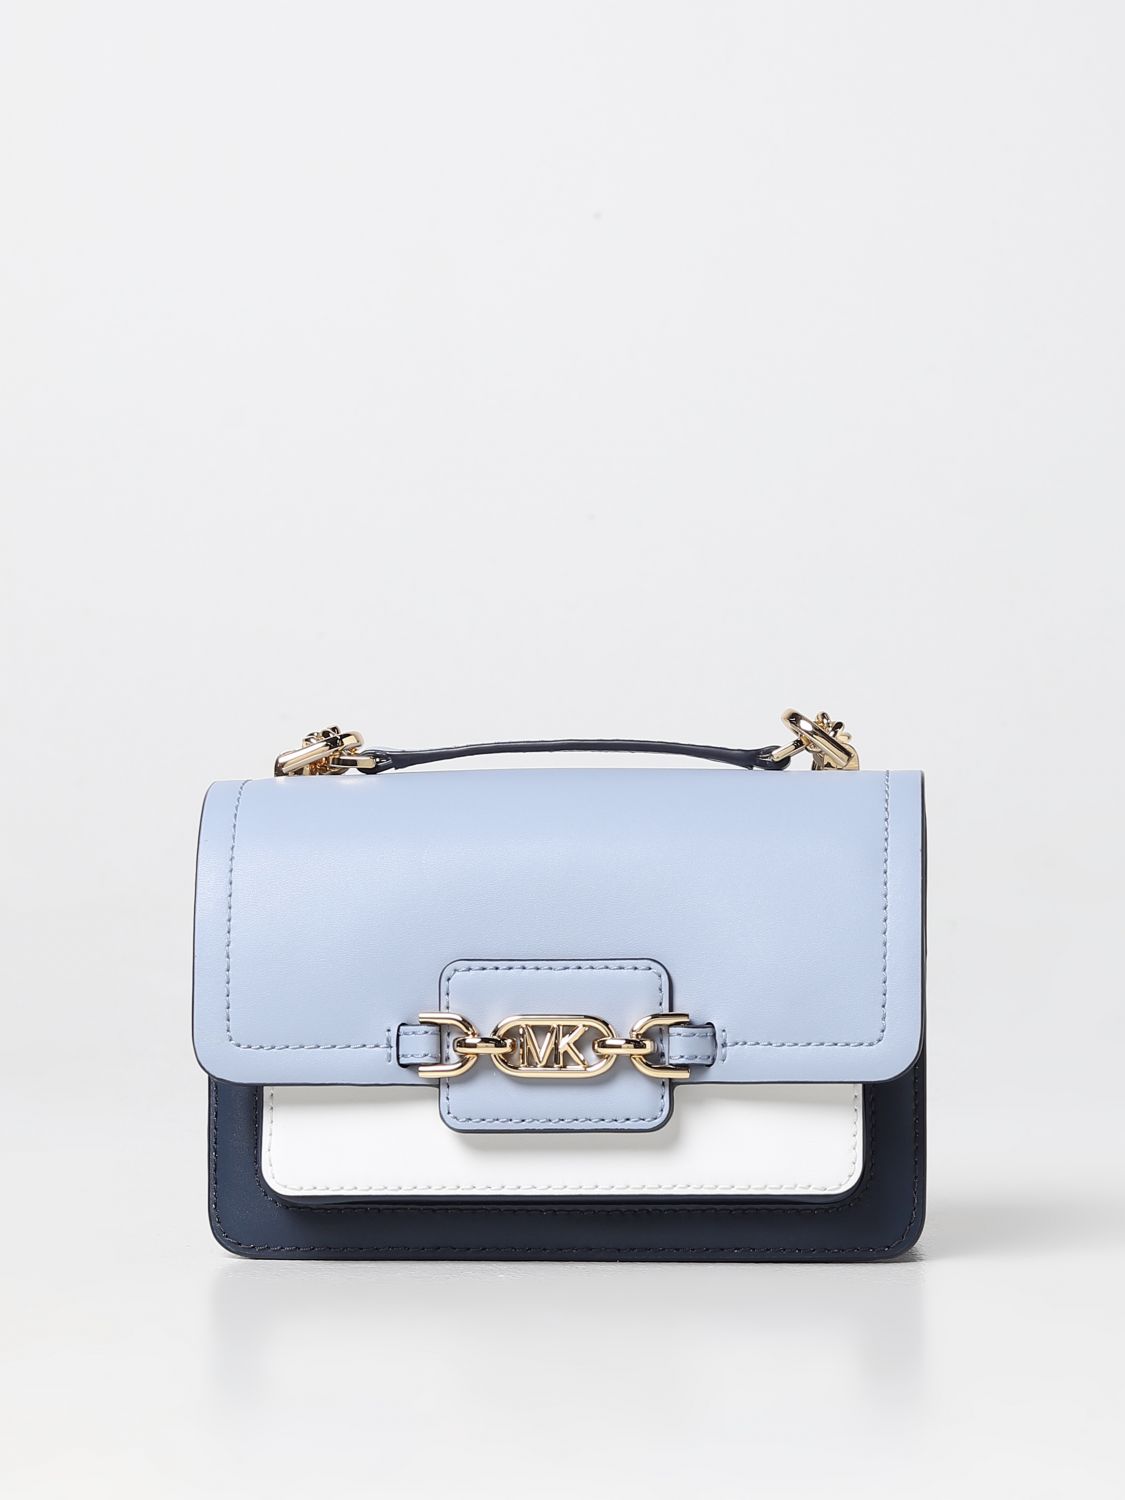 White And Blue Michael Kors Purse/ Handbag for Sale in